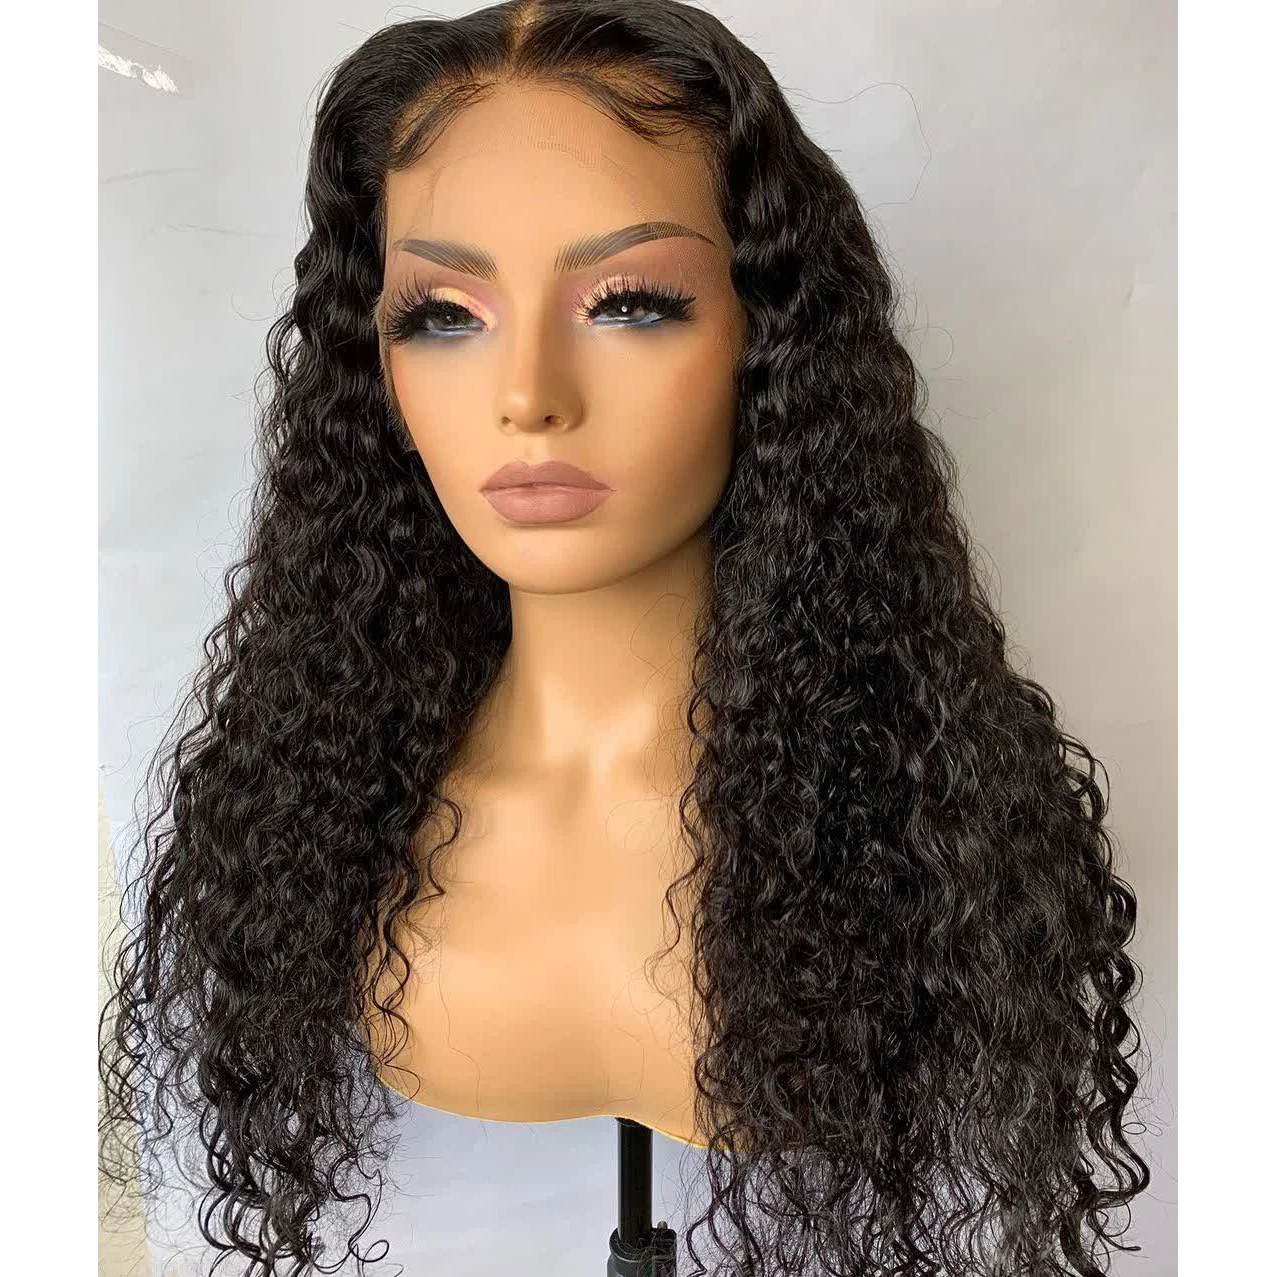 

Wholesale 13x4 curly closure frontal wig Peruvian lace front wigs natural curly for black women with pre plucked hairline